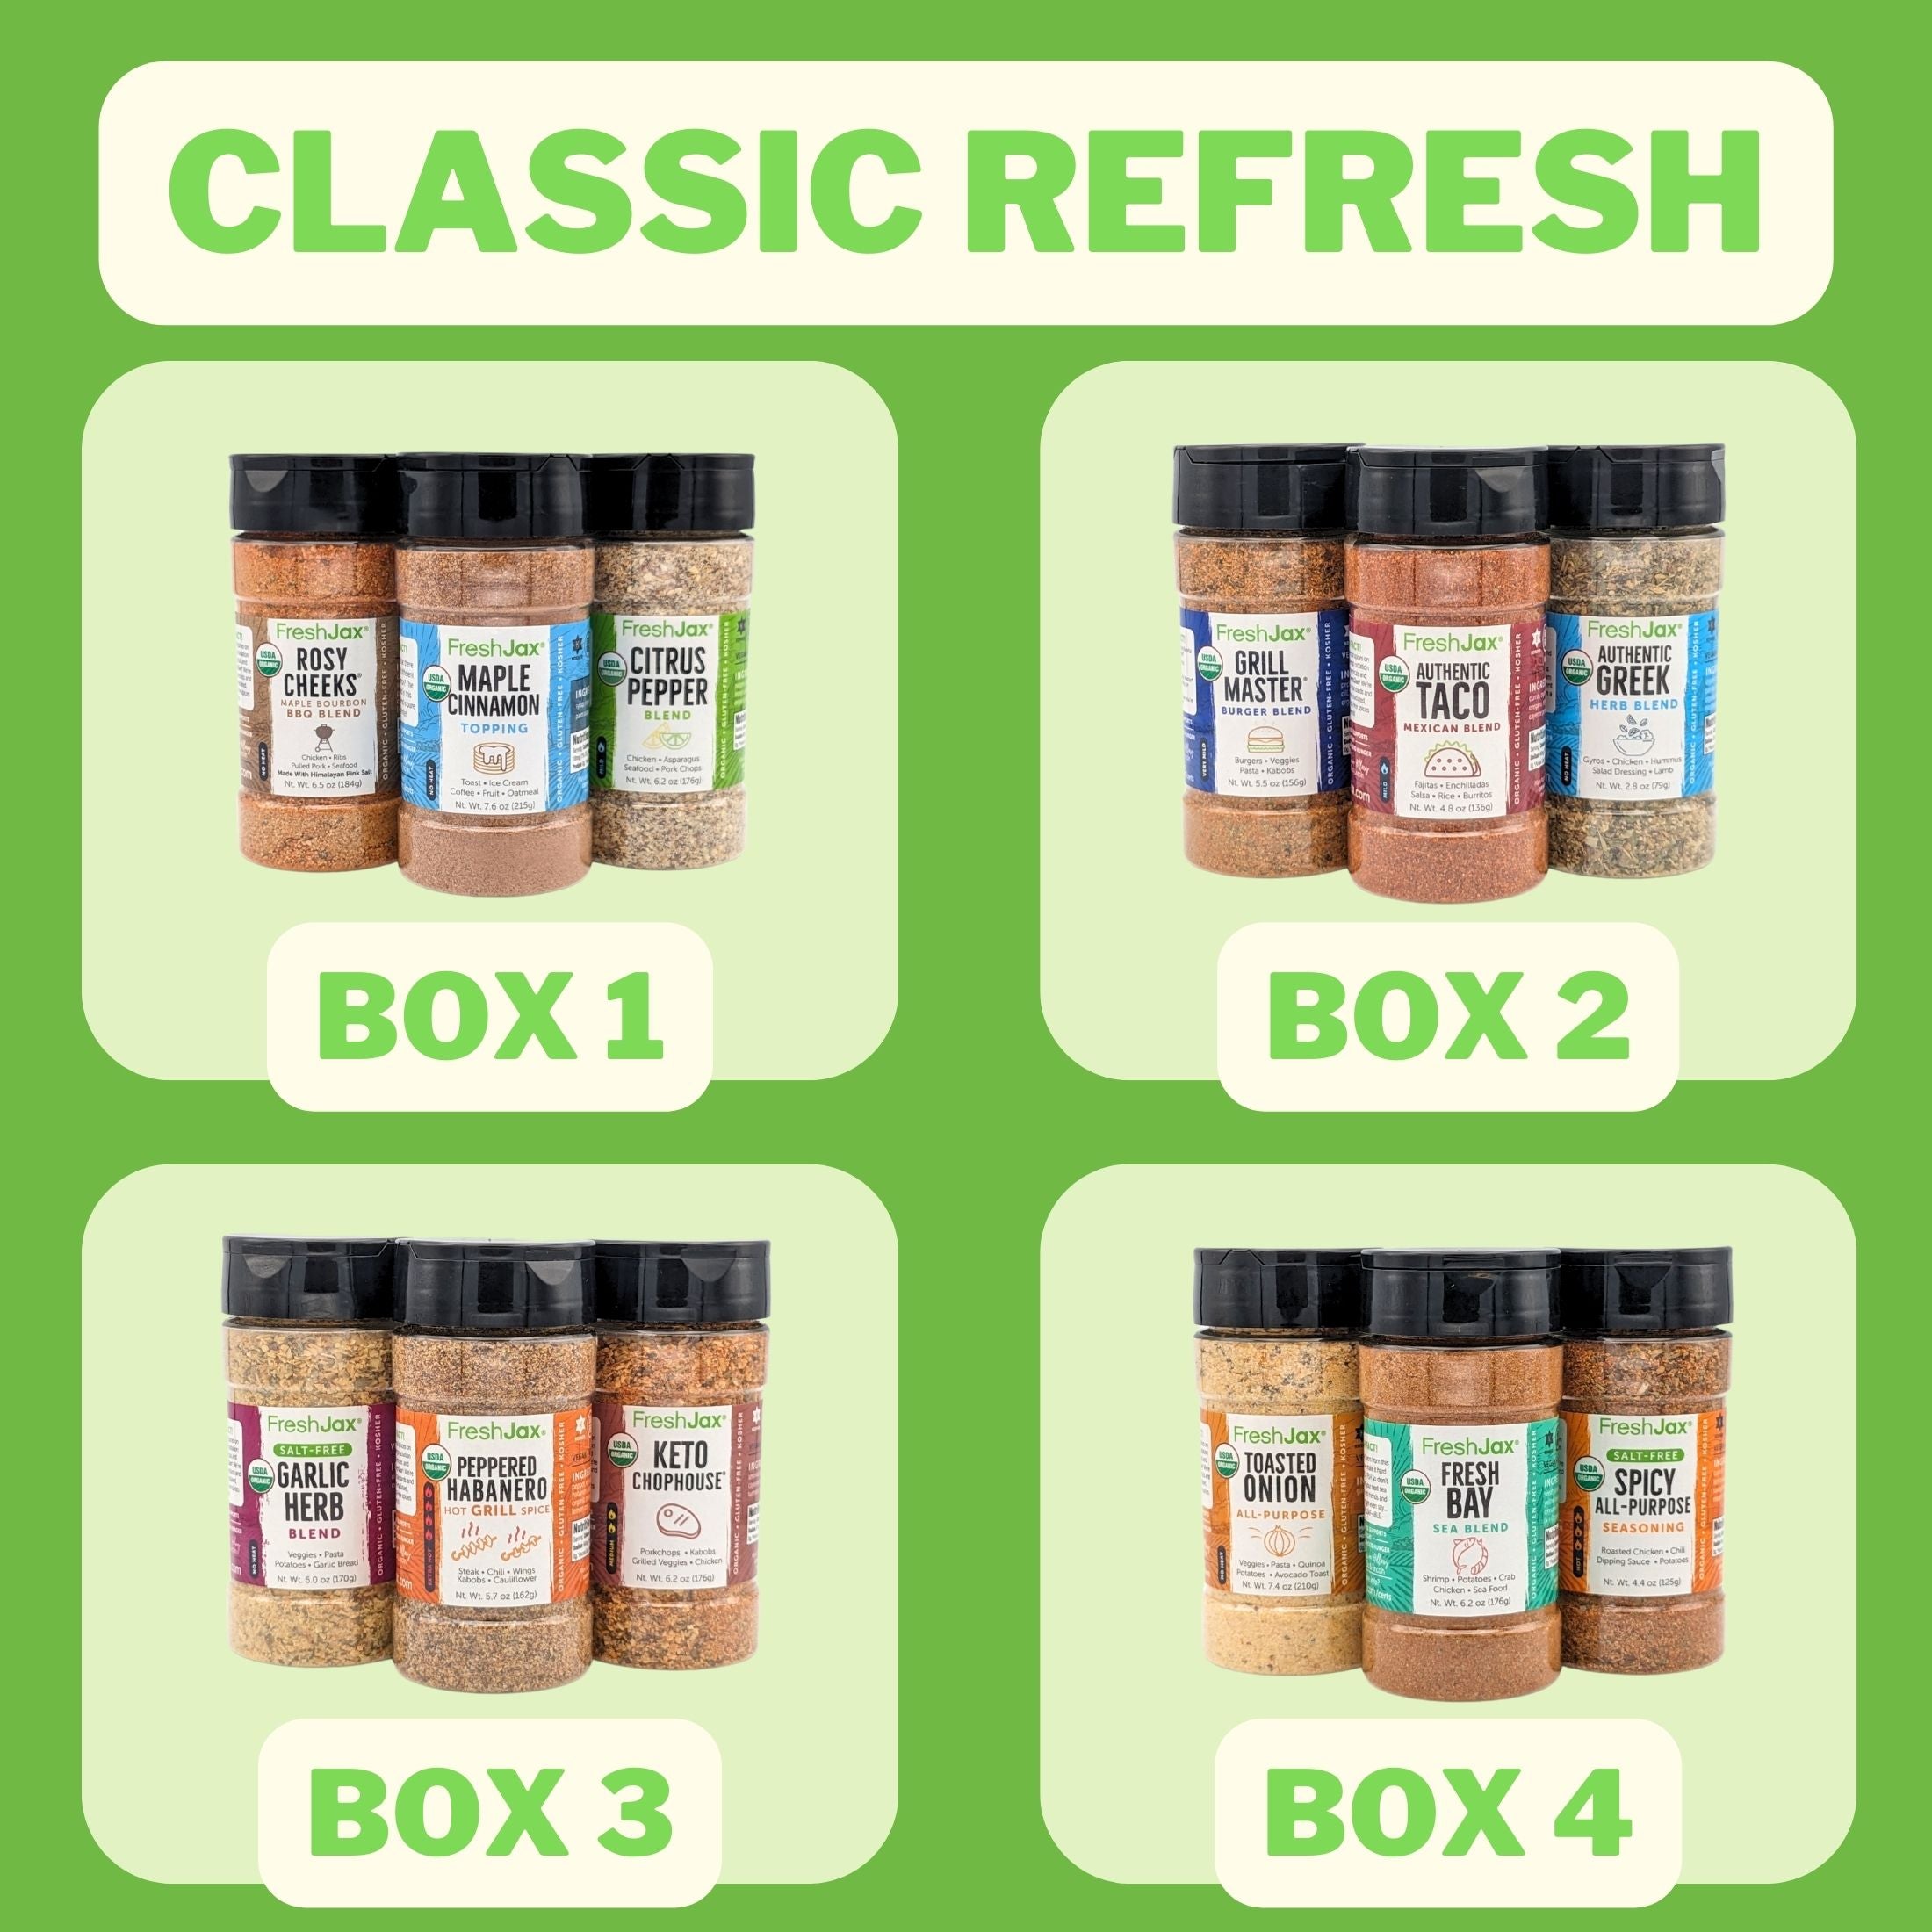 FreshJax Classic ReFresh Box Contents for Boxes 1-4